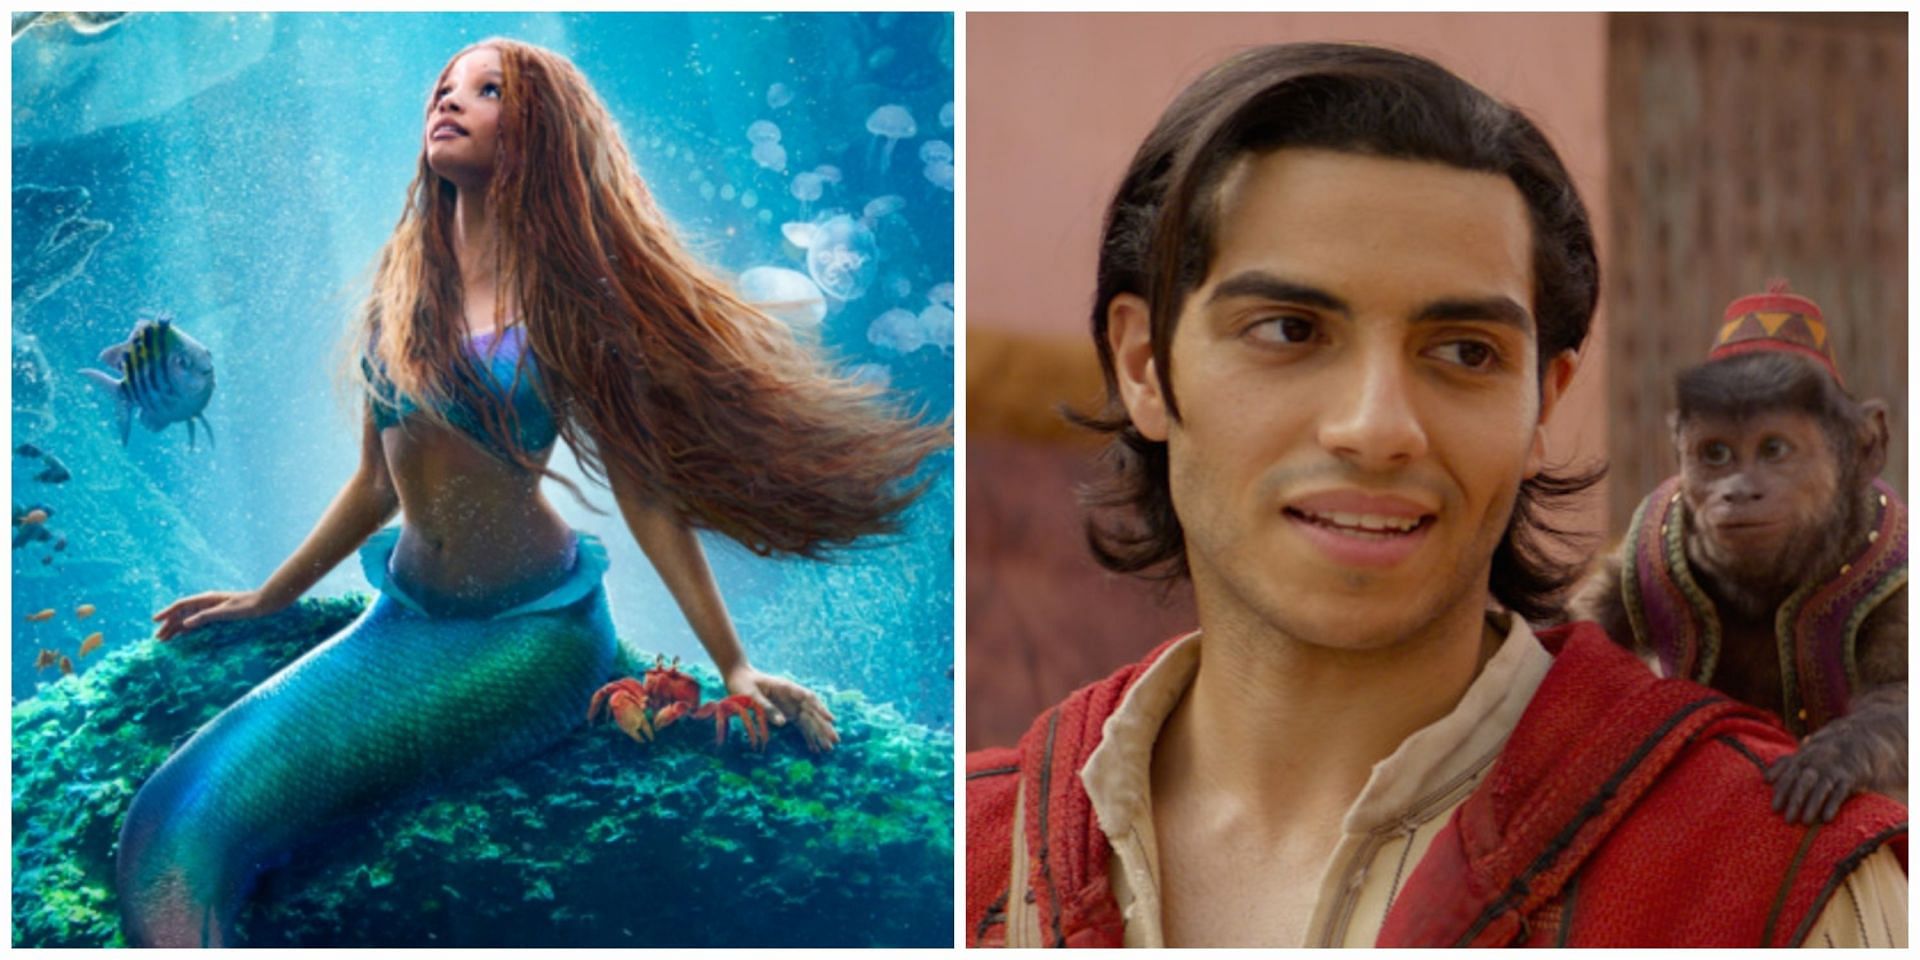 Social media users lash out on the &quot;Aladdin&quot; actor as he passed controversial comments on The Little Mermaid. (Image via Disney)